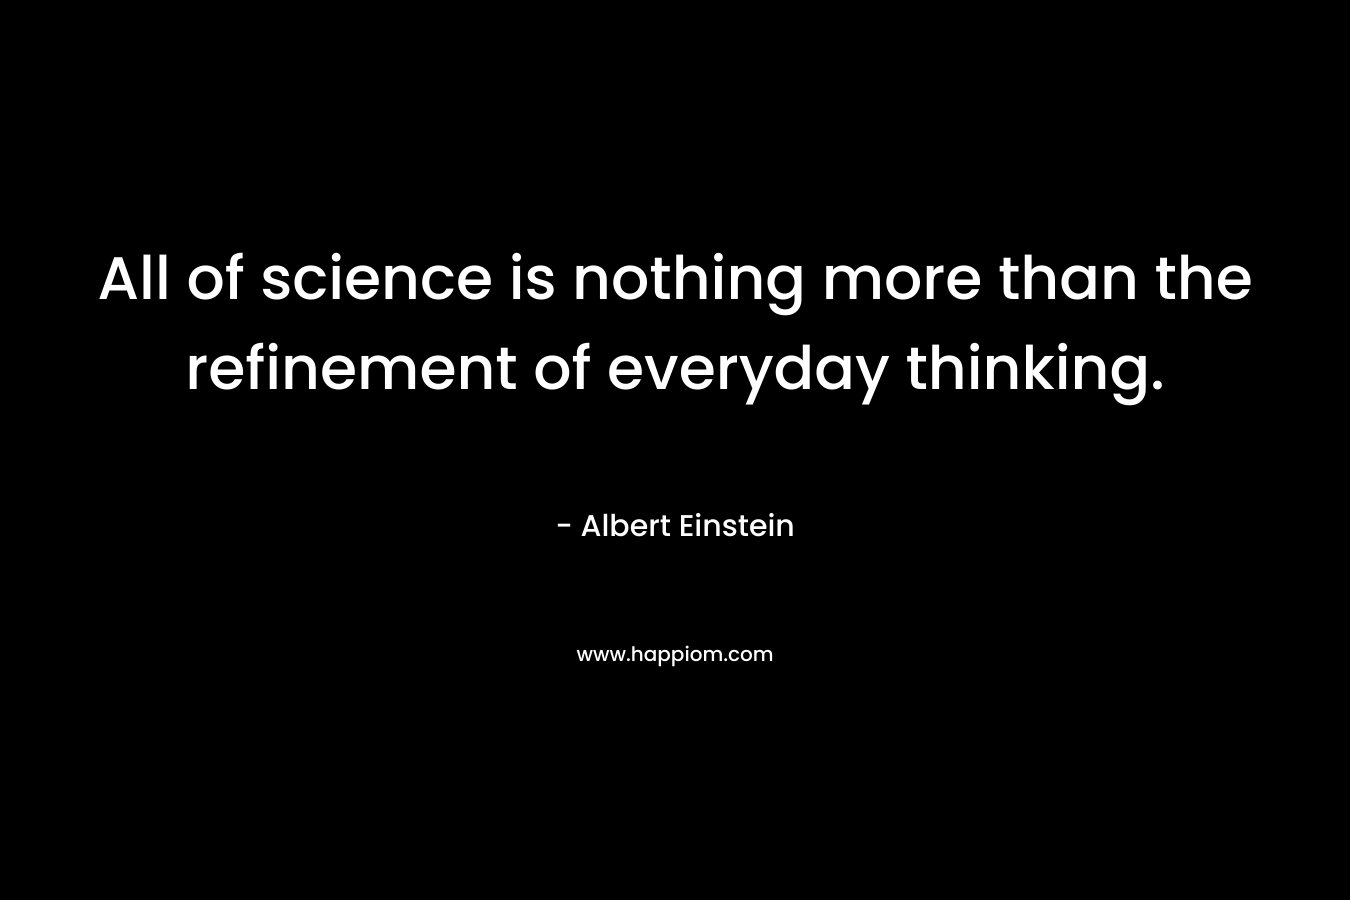 All of science is nothing more than the refinement of everyday thinking.